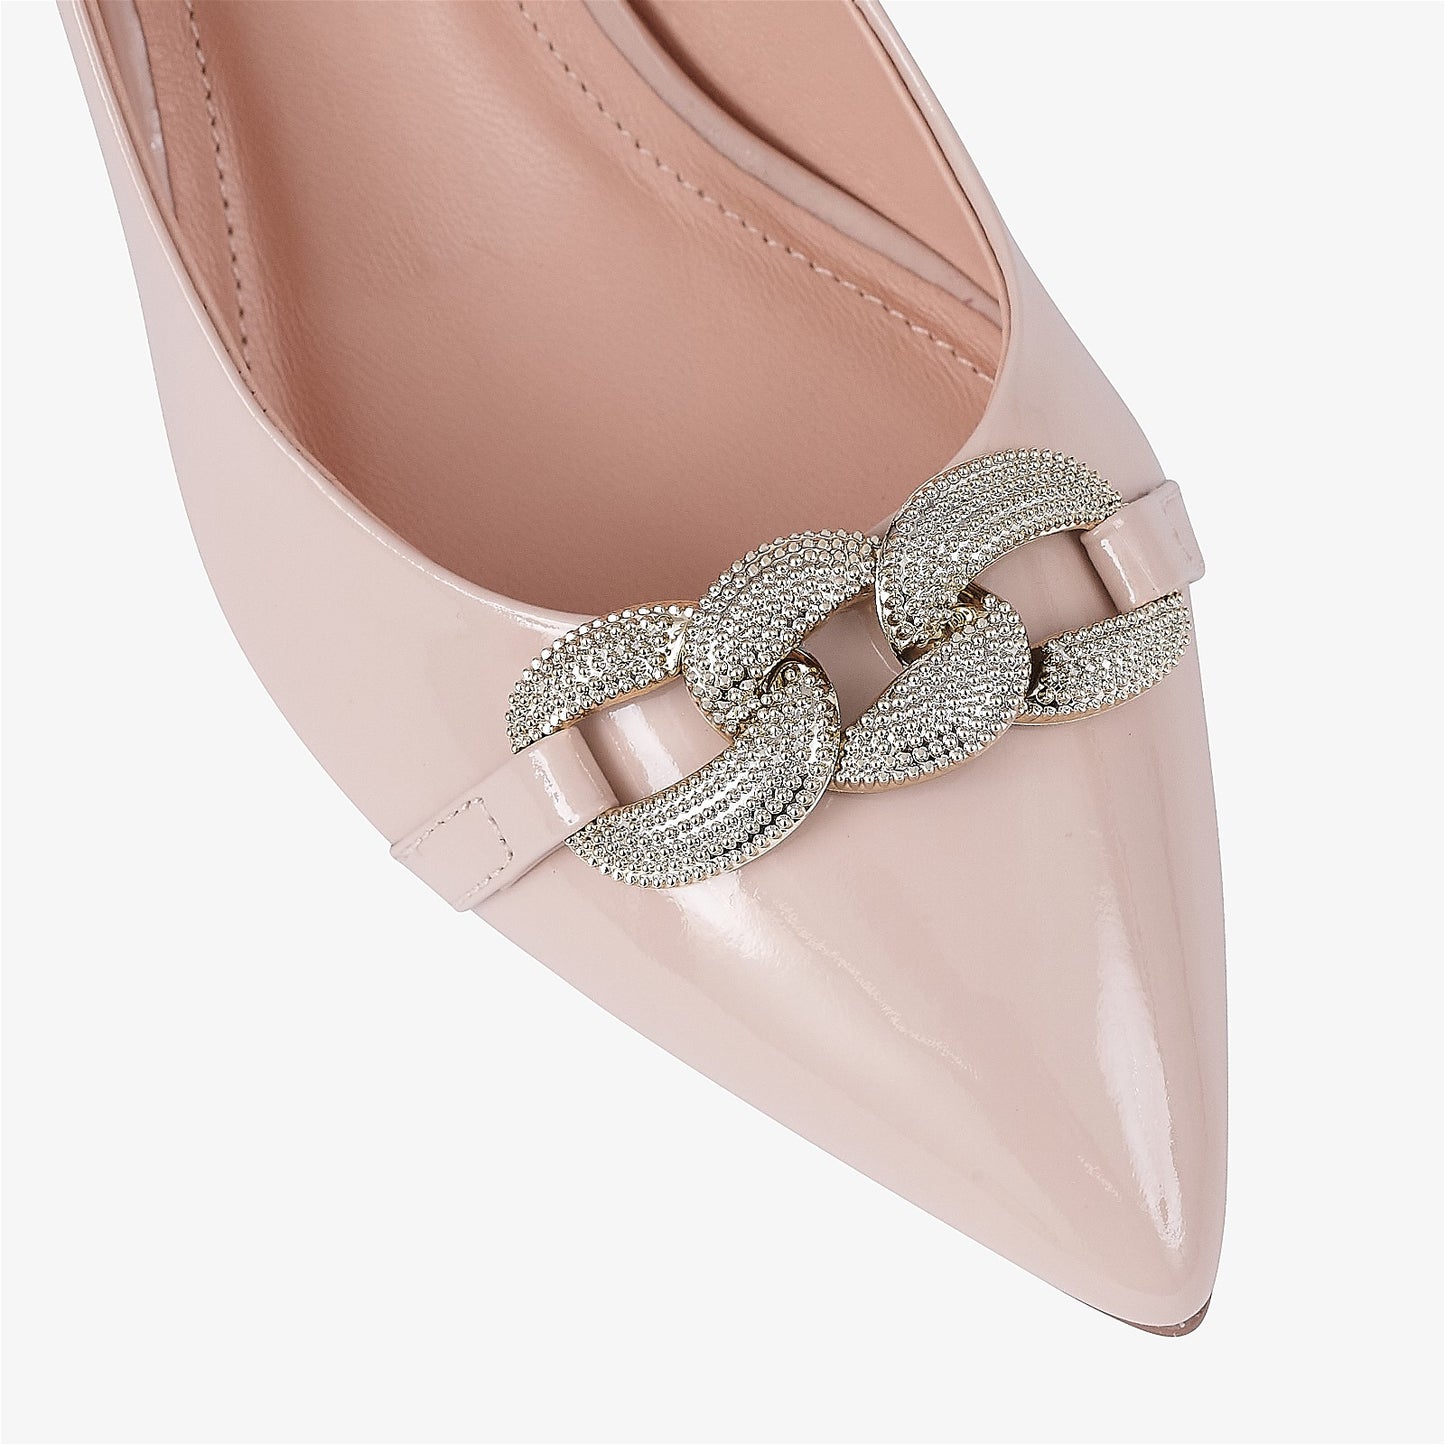 Mazy Nude Pink Patent